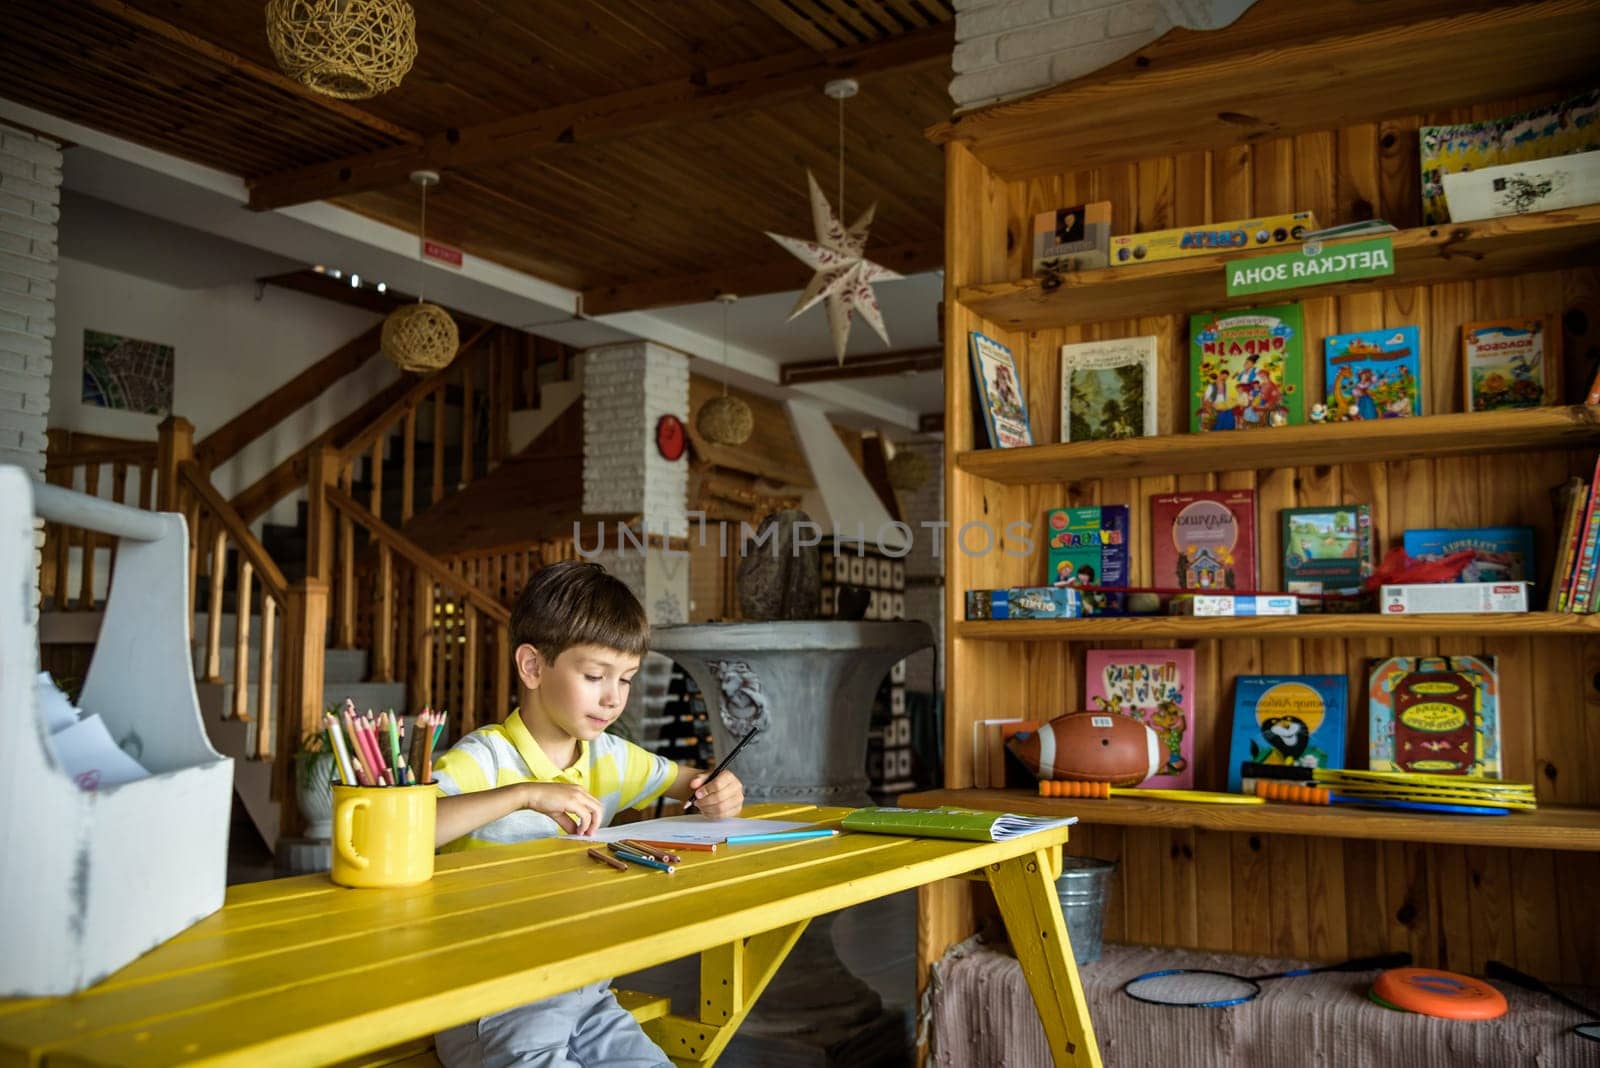 Little cutie curly haired baby boy sitting on floor of eco living room interior next to books shelf and drawing with colorful felt tip pens in album. Creative hobby for kids and playtime activity.